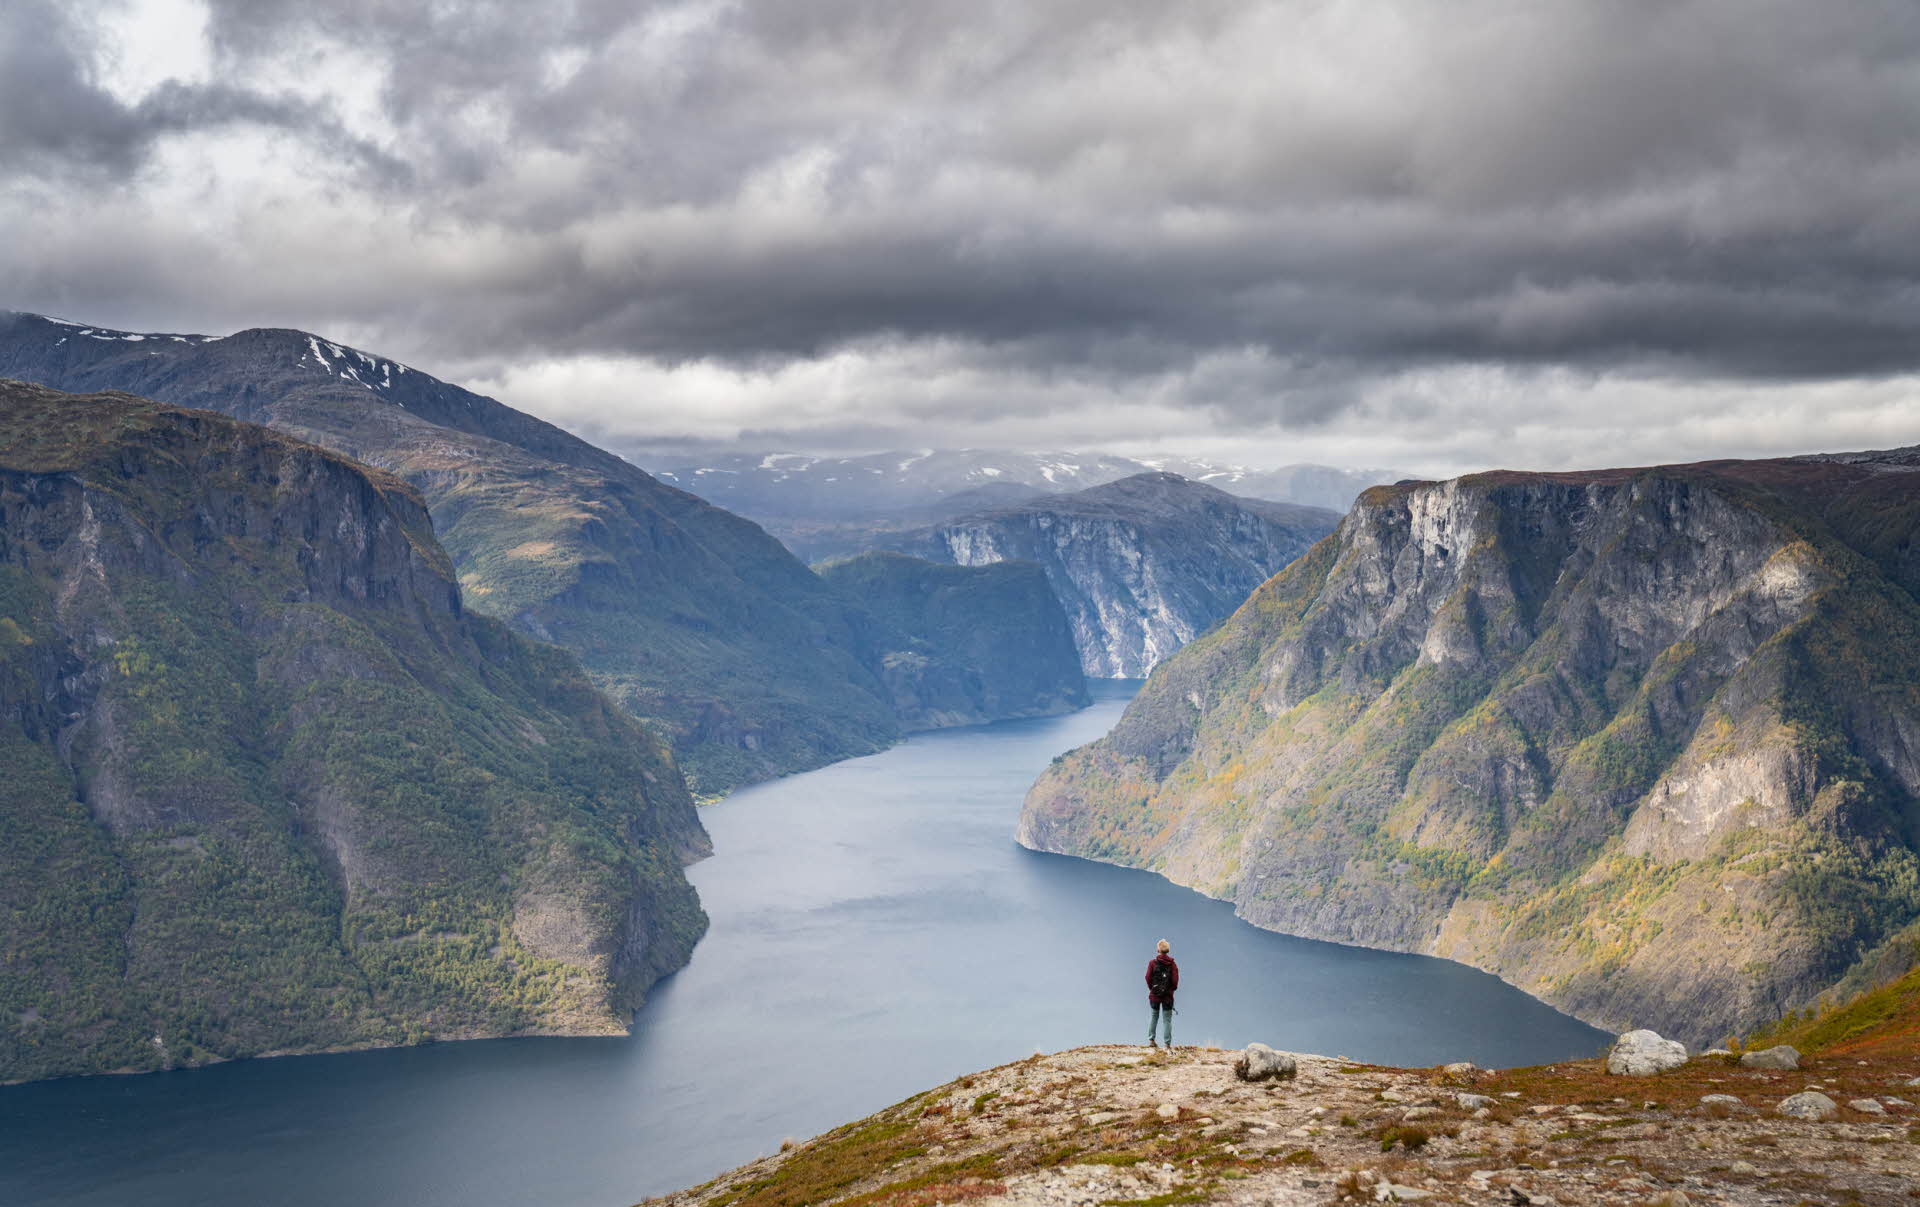 A person standing on the trail to Prest looking at the Aurlandsfjord on a grey autumn day.